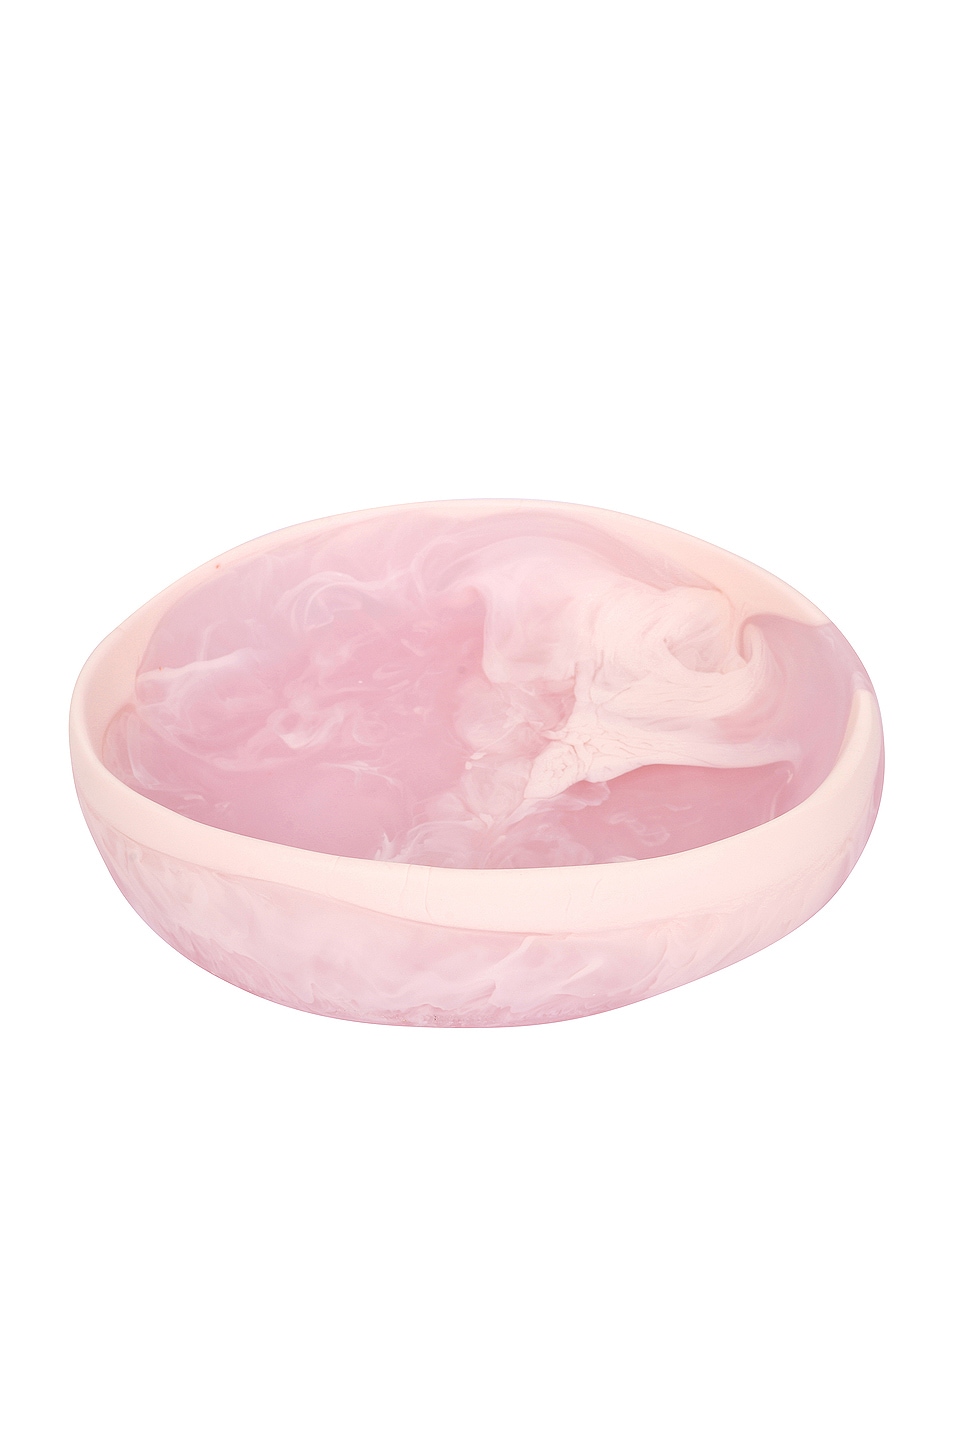 Image 1 of DINOSAUR DESIGNS Small Earth Bowl in Shell Pink